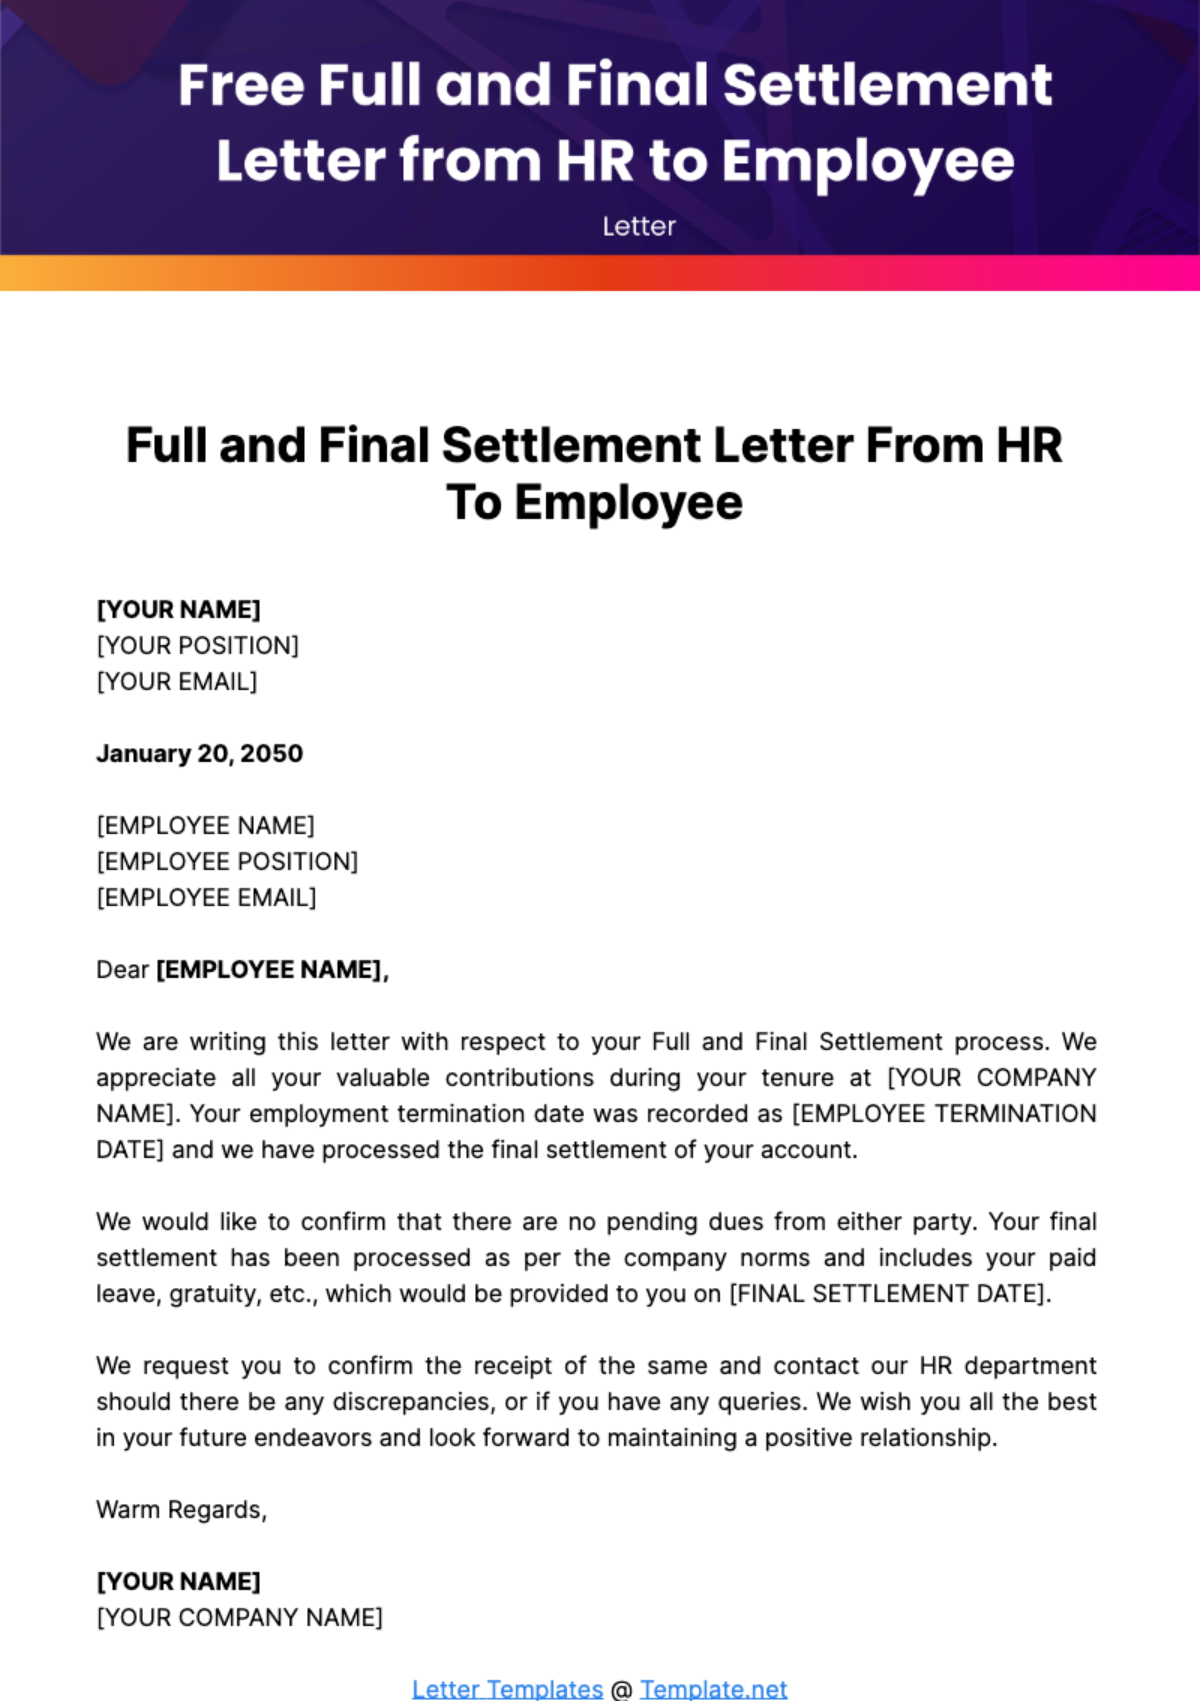 Free Full and Final Settlement Letter from HR to Employee Template